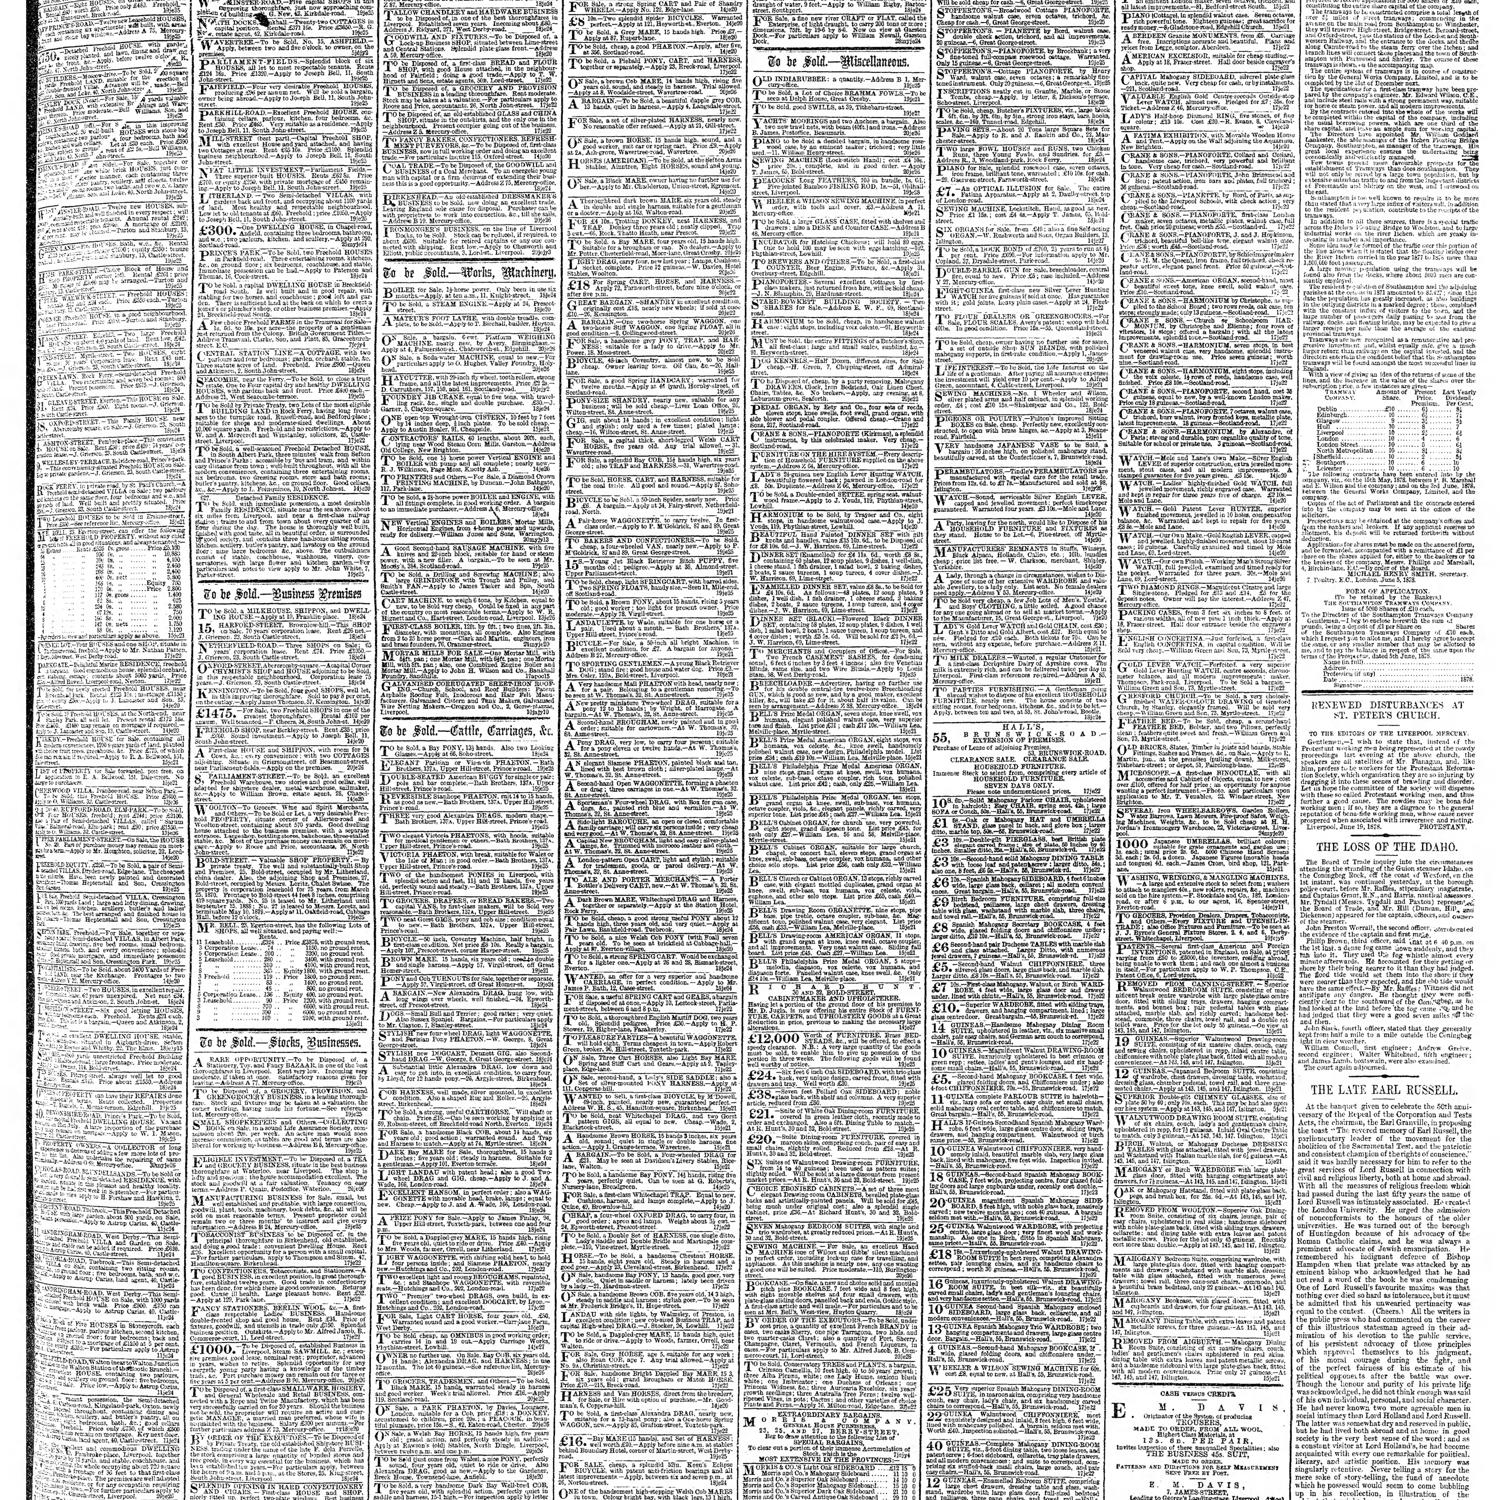 The Liverpool Mercury, 1878-06-20, page 3